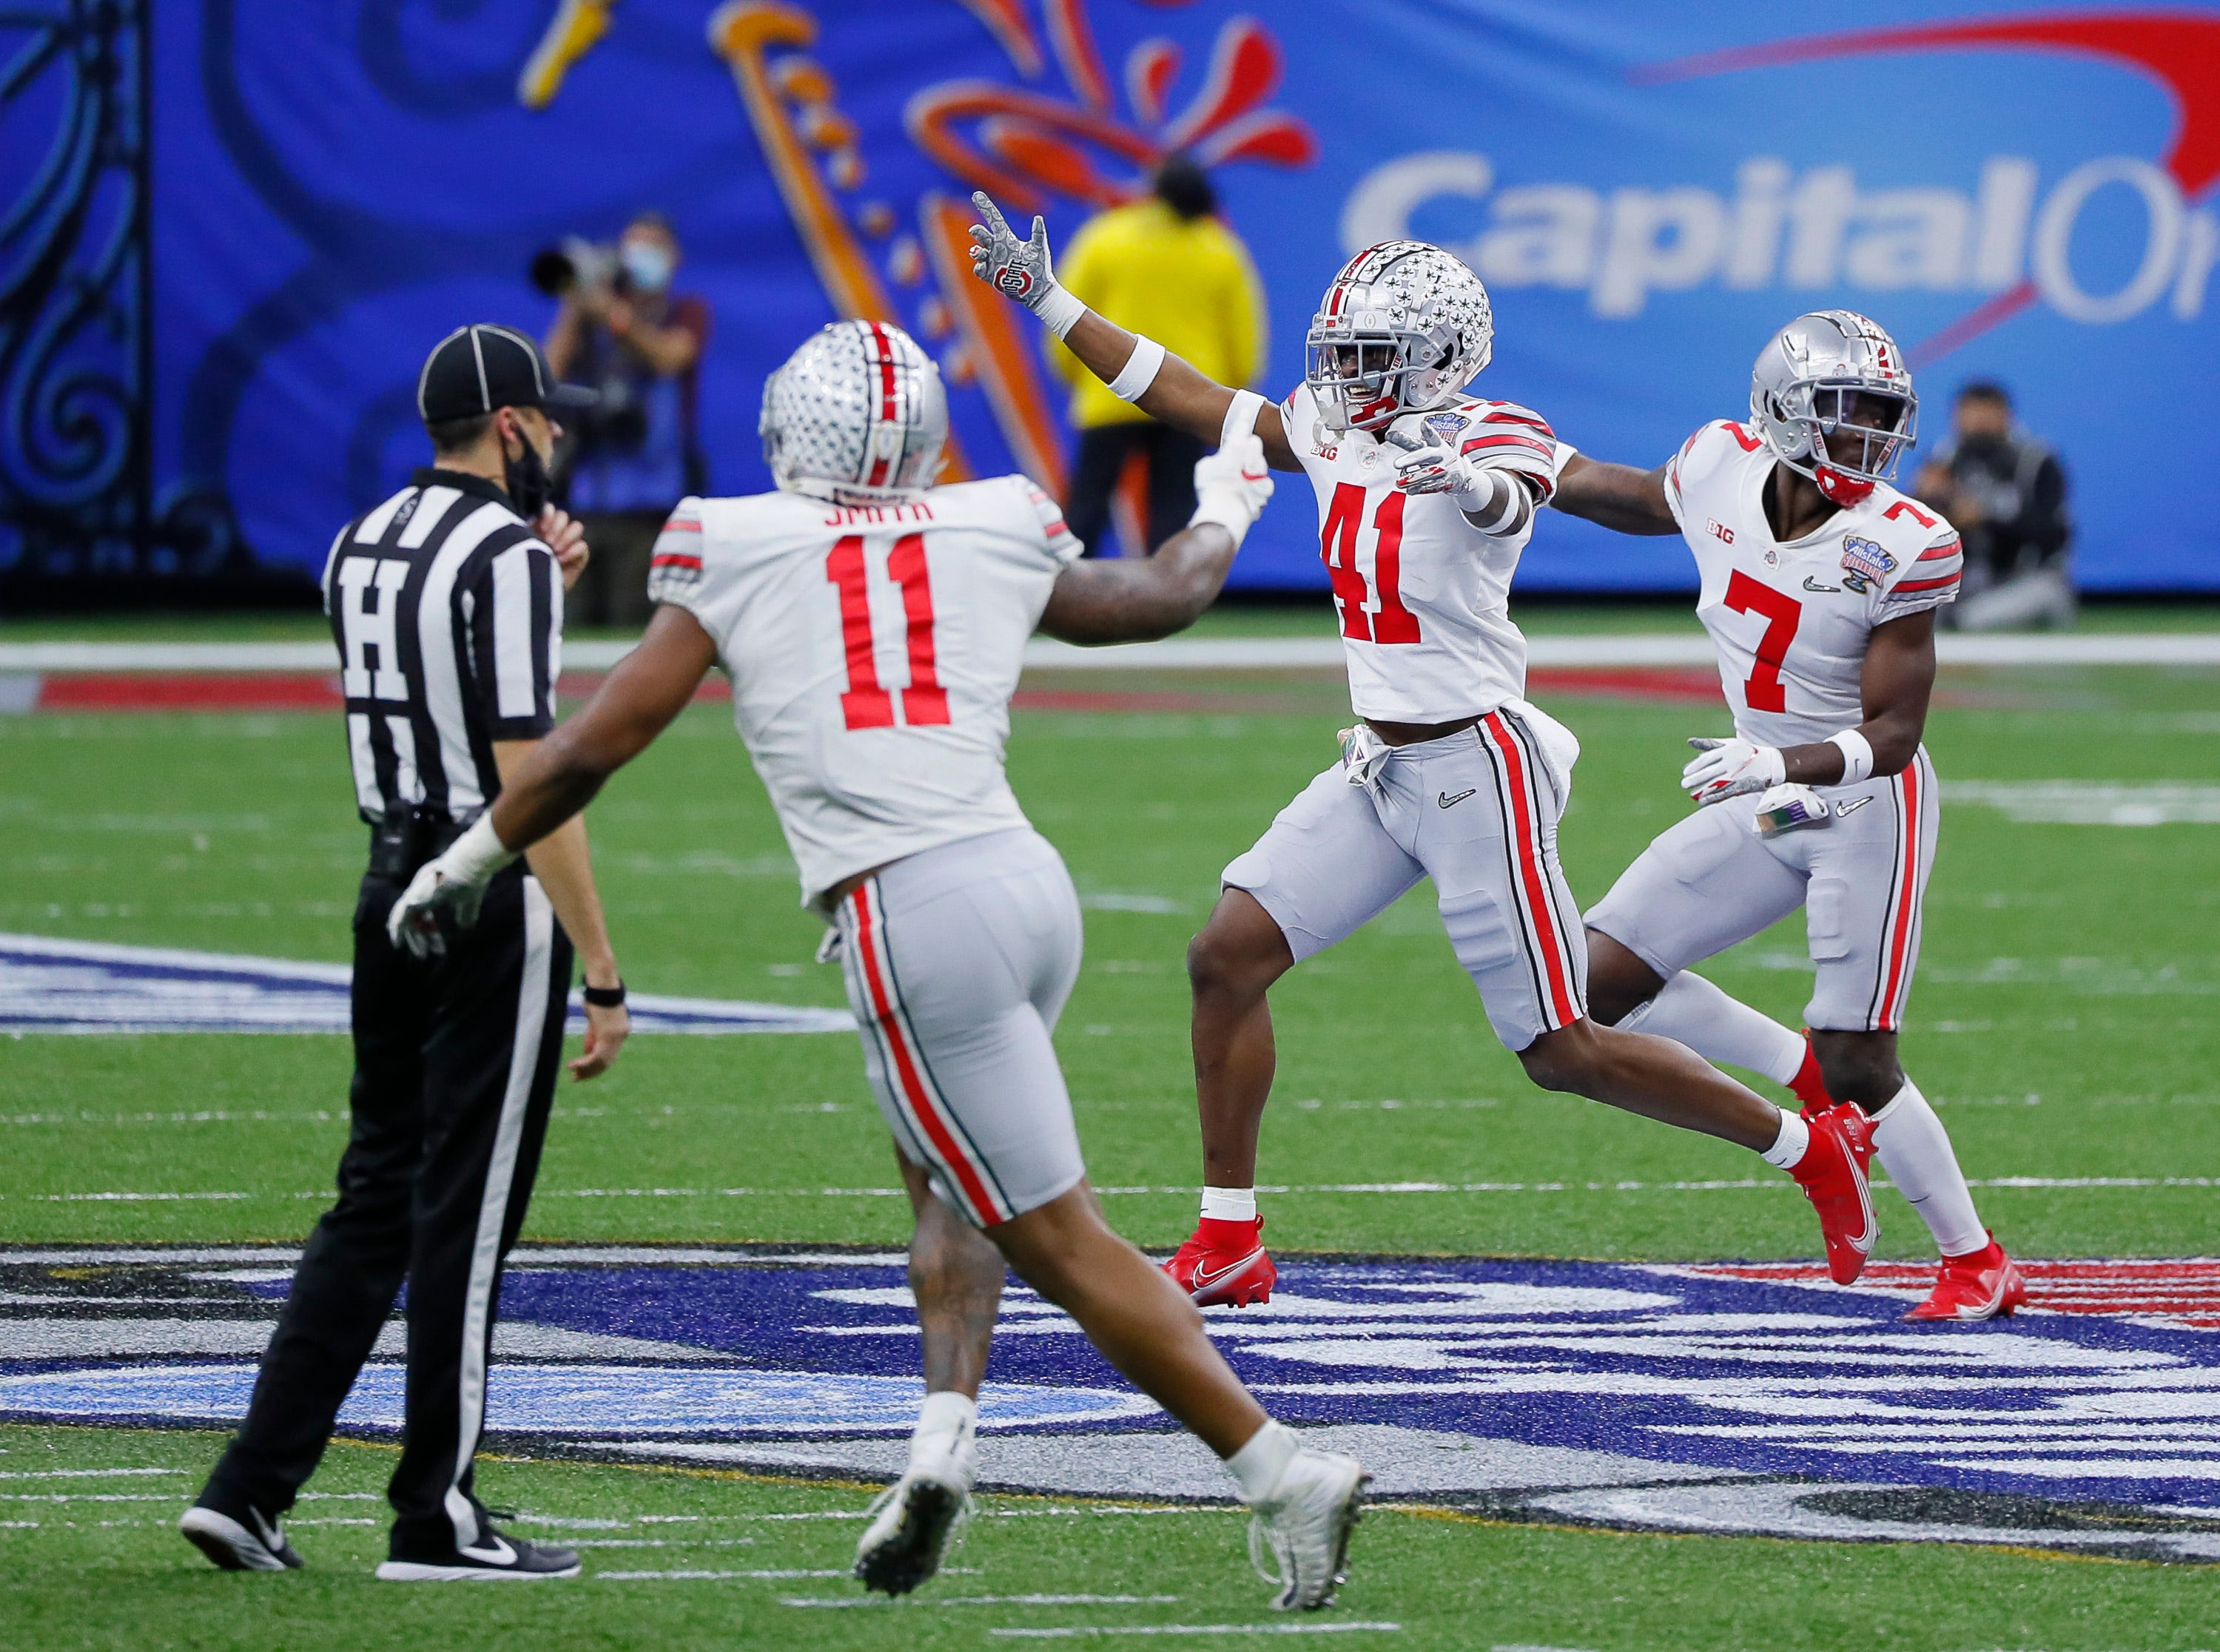 Top Five Ohio State Prospects in the 2022 NFL Draft Visit NFL Draft